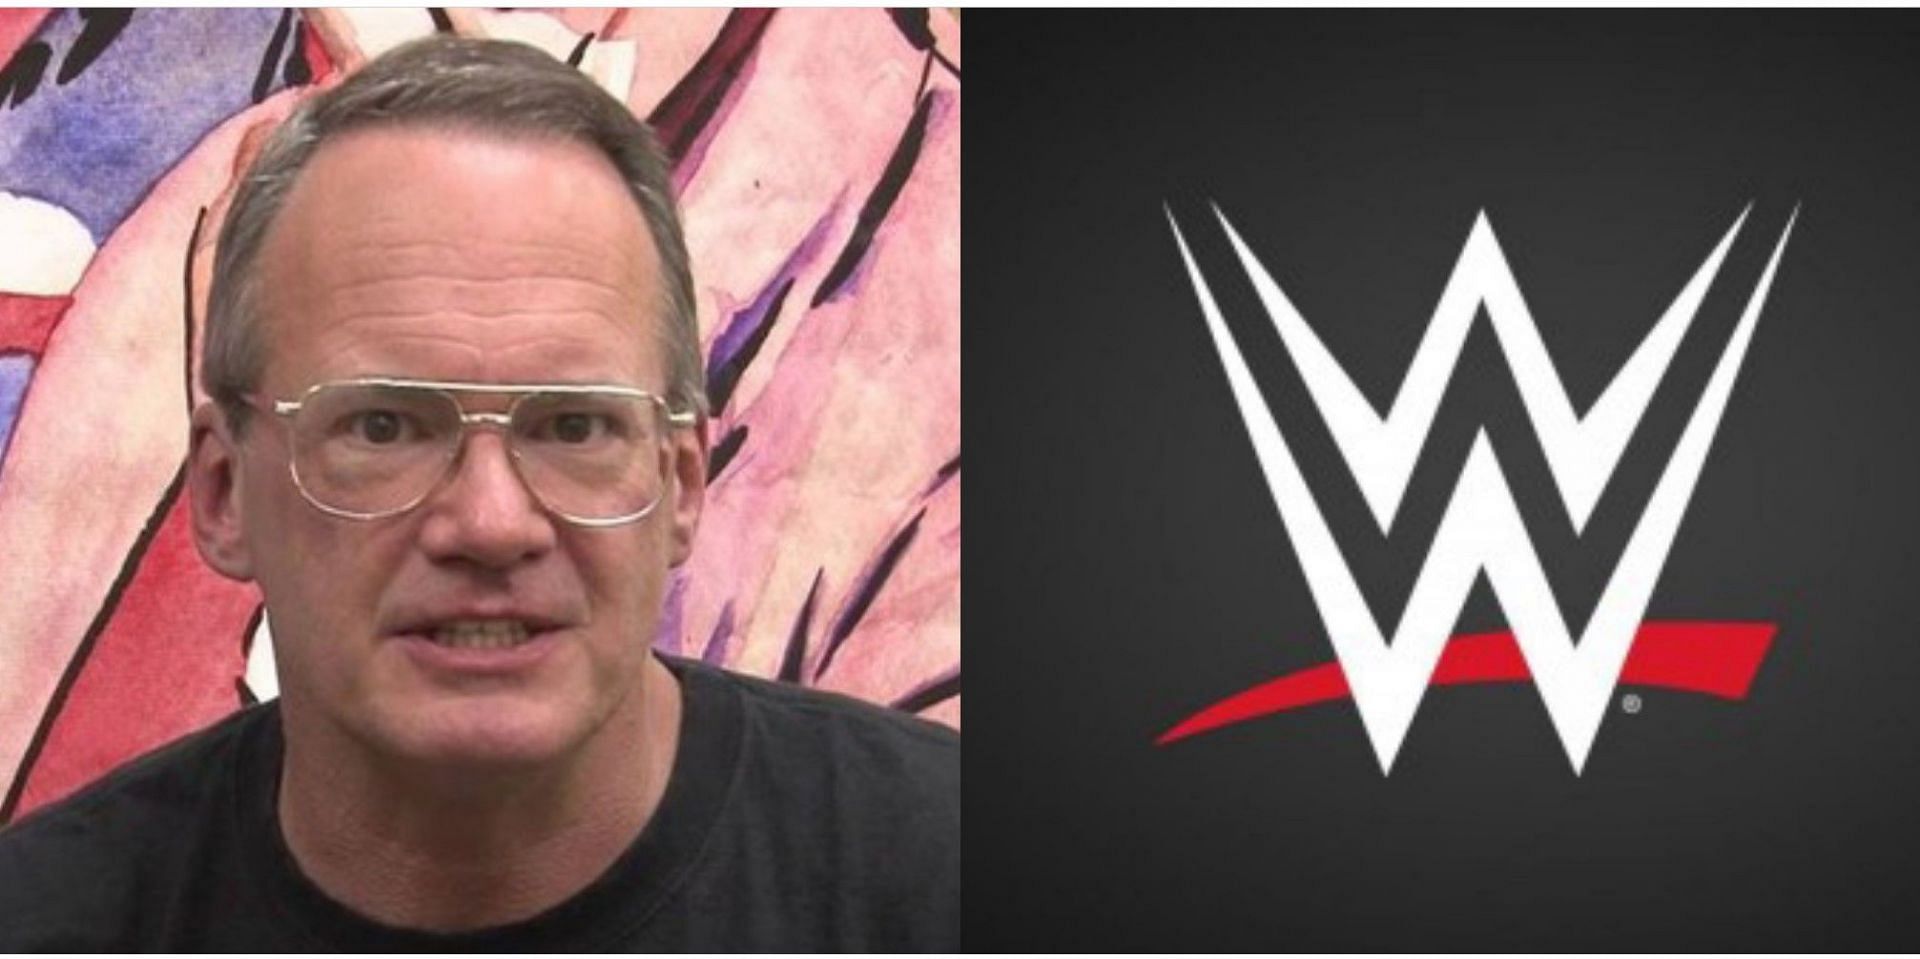 Jim Cornette is a former WWE personality!